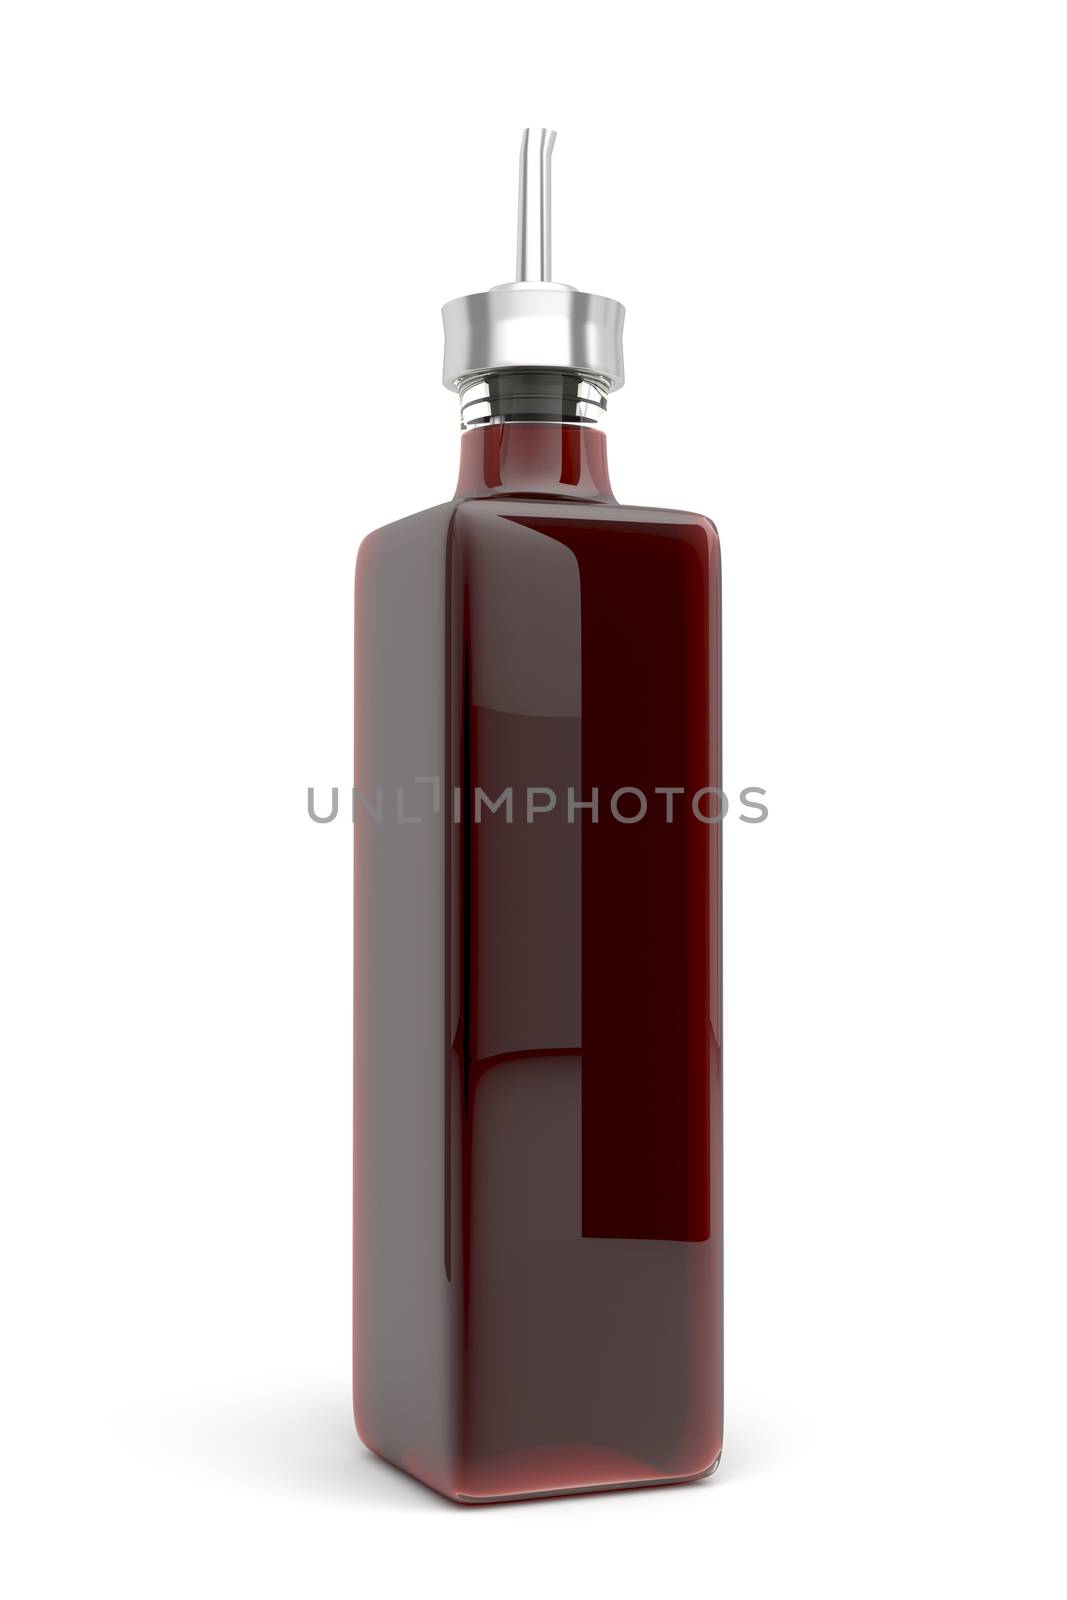 Vinegar by magraphics